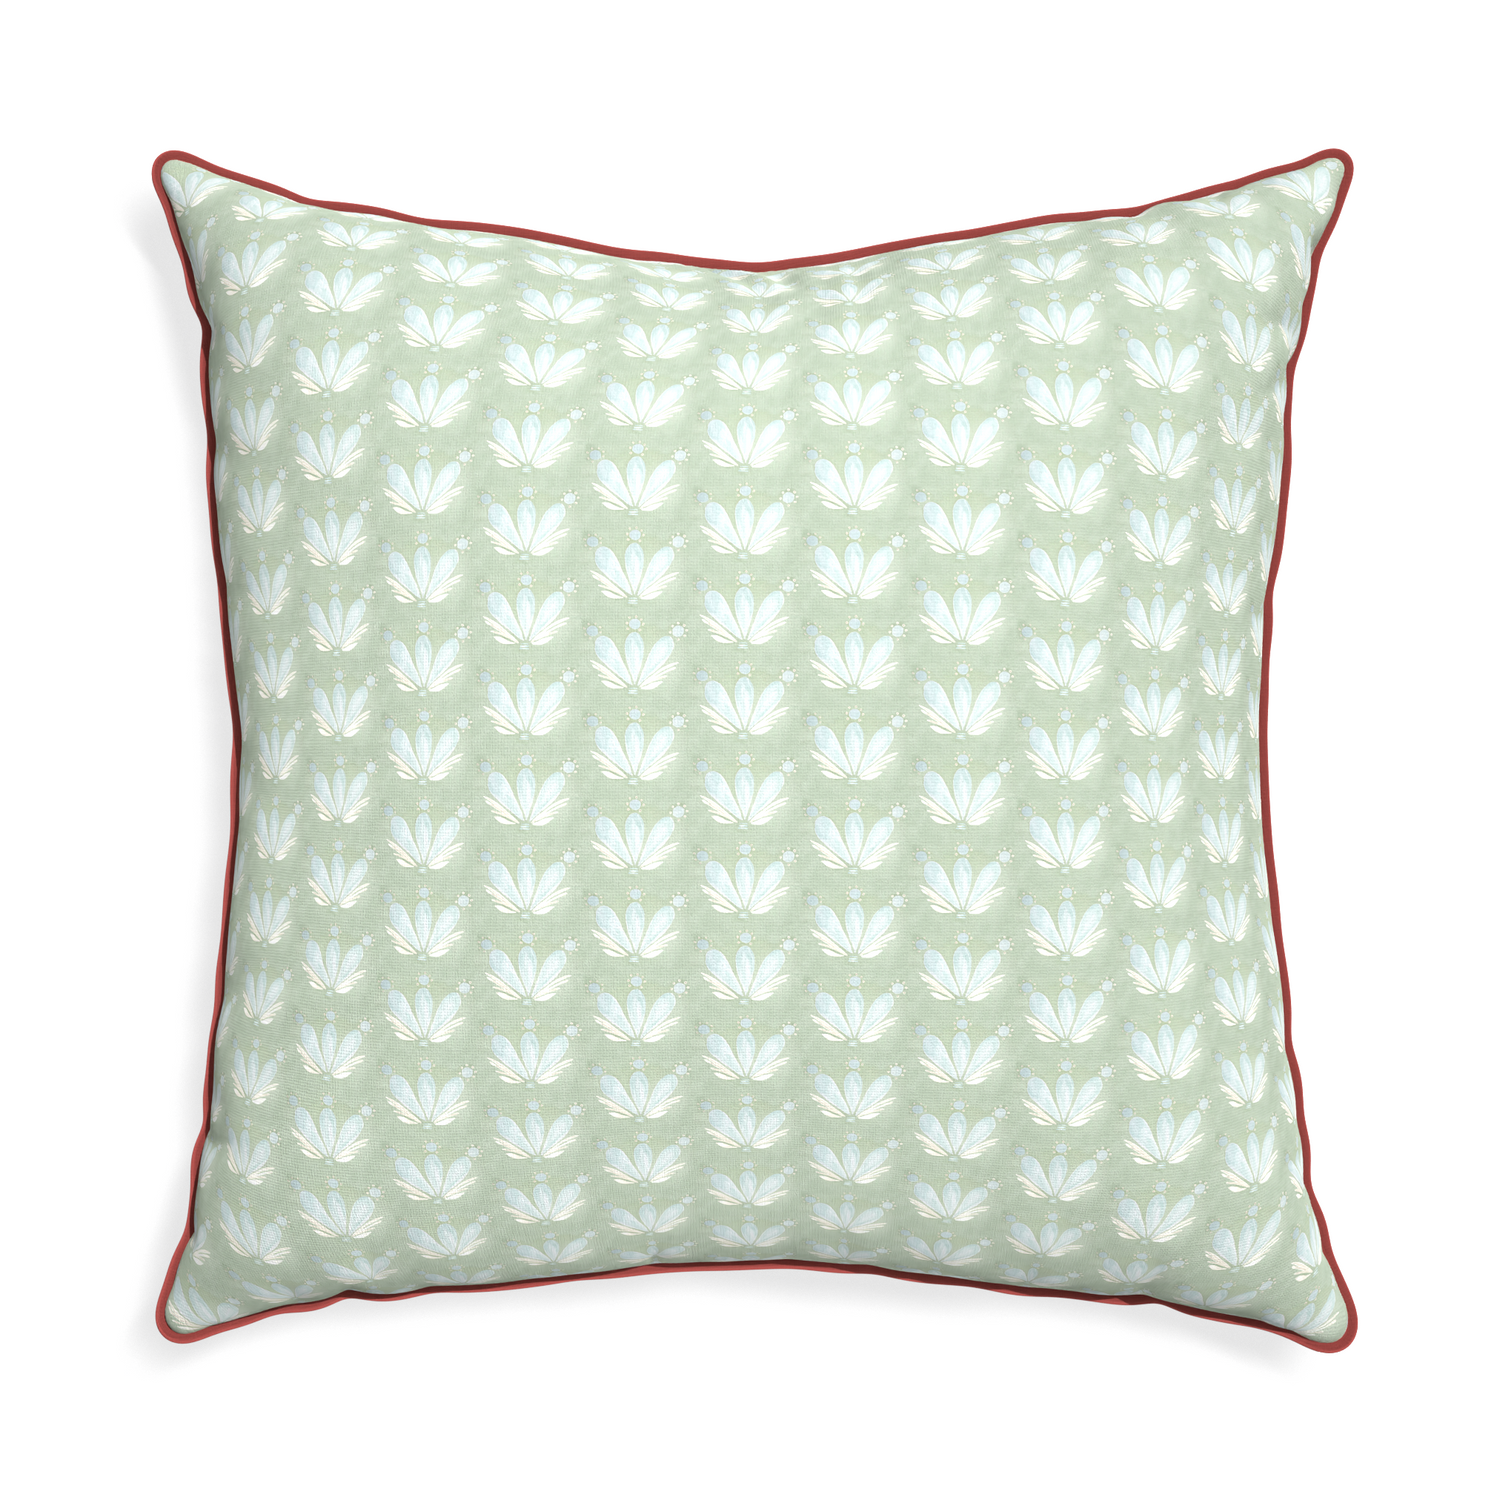 Euro-sham serena sea salt custom blue & green floral drop repeatpillow with c piping on white background